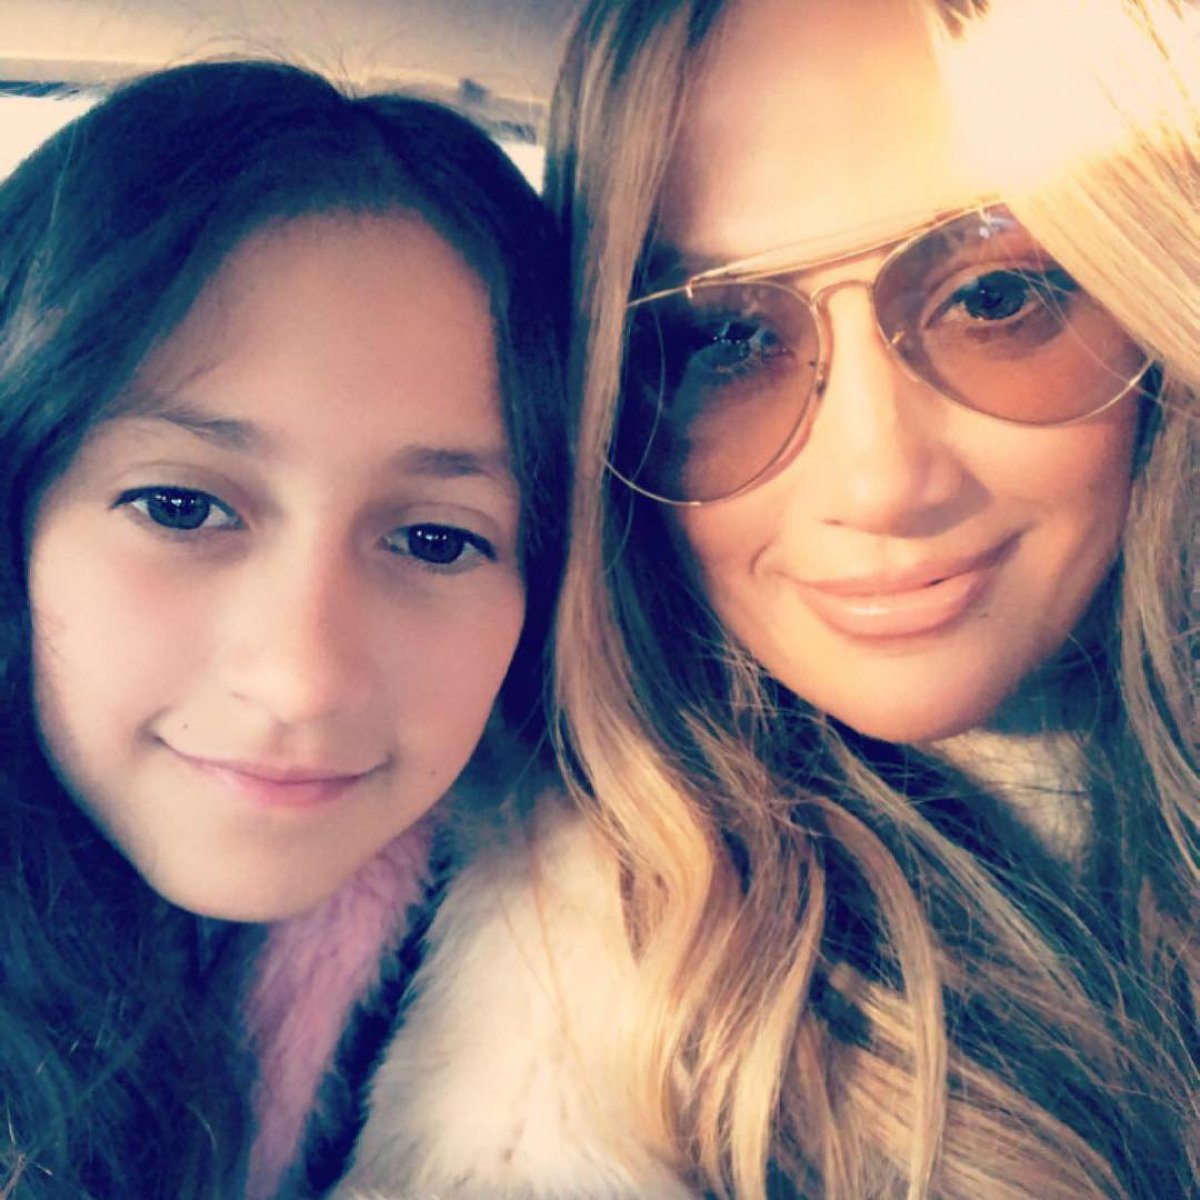 Jennifer Lopez smiles in new photo with daughter Emme - Reality TV World